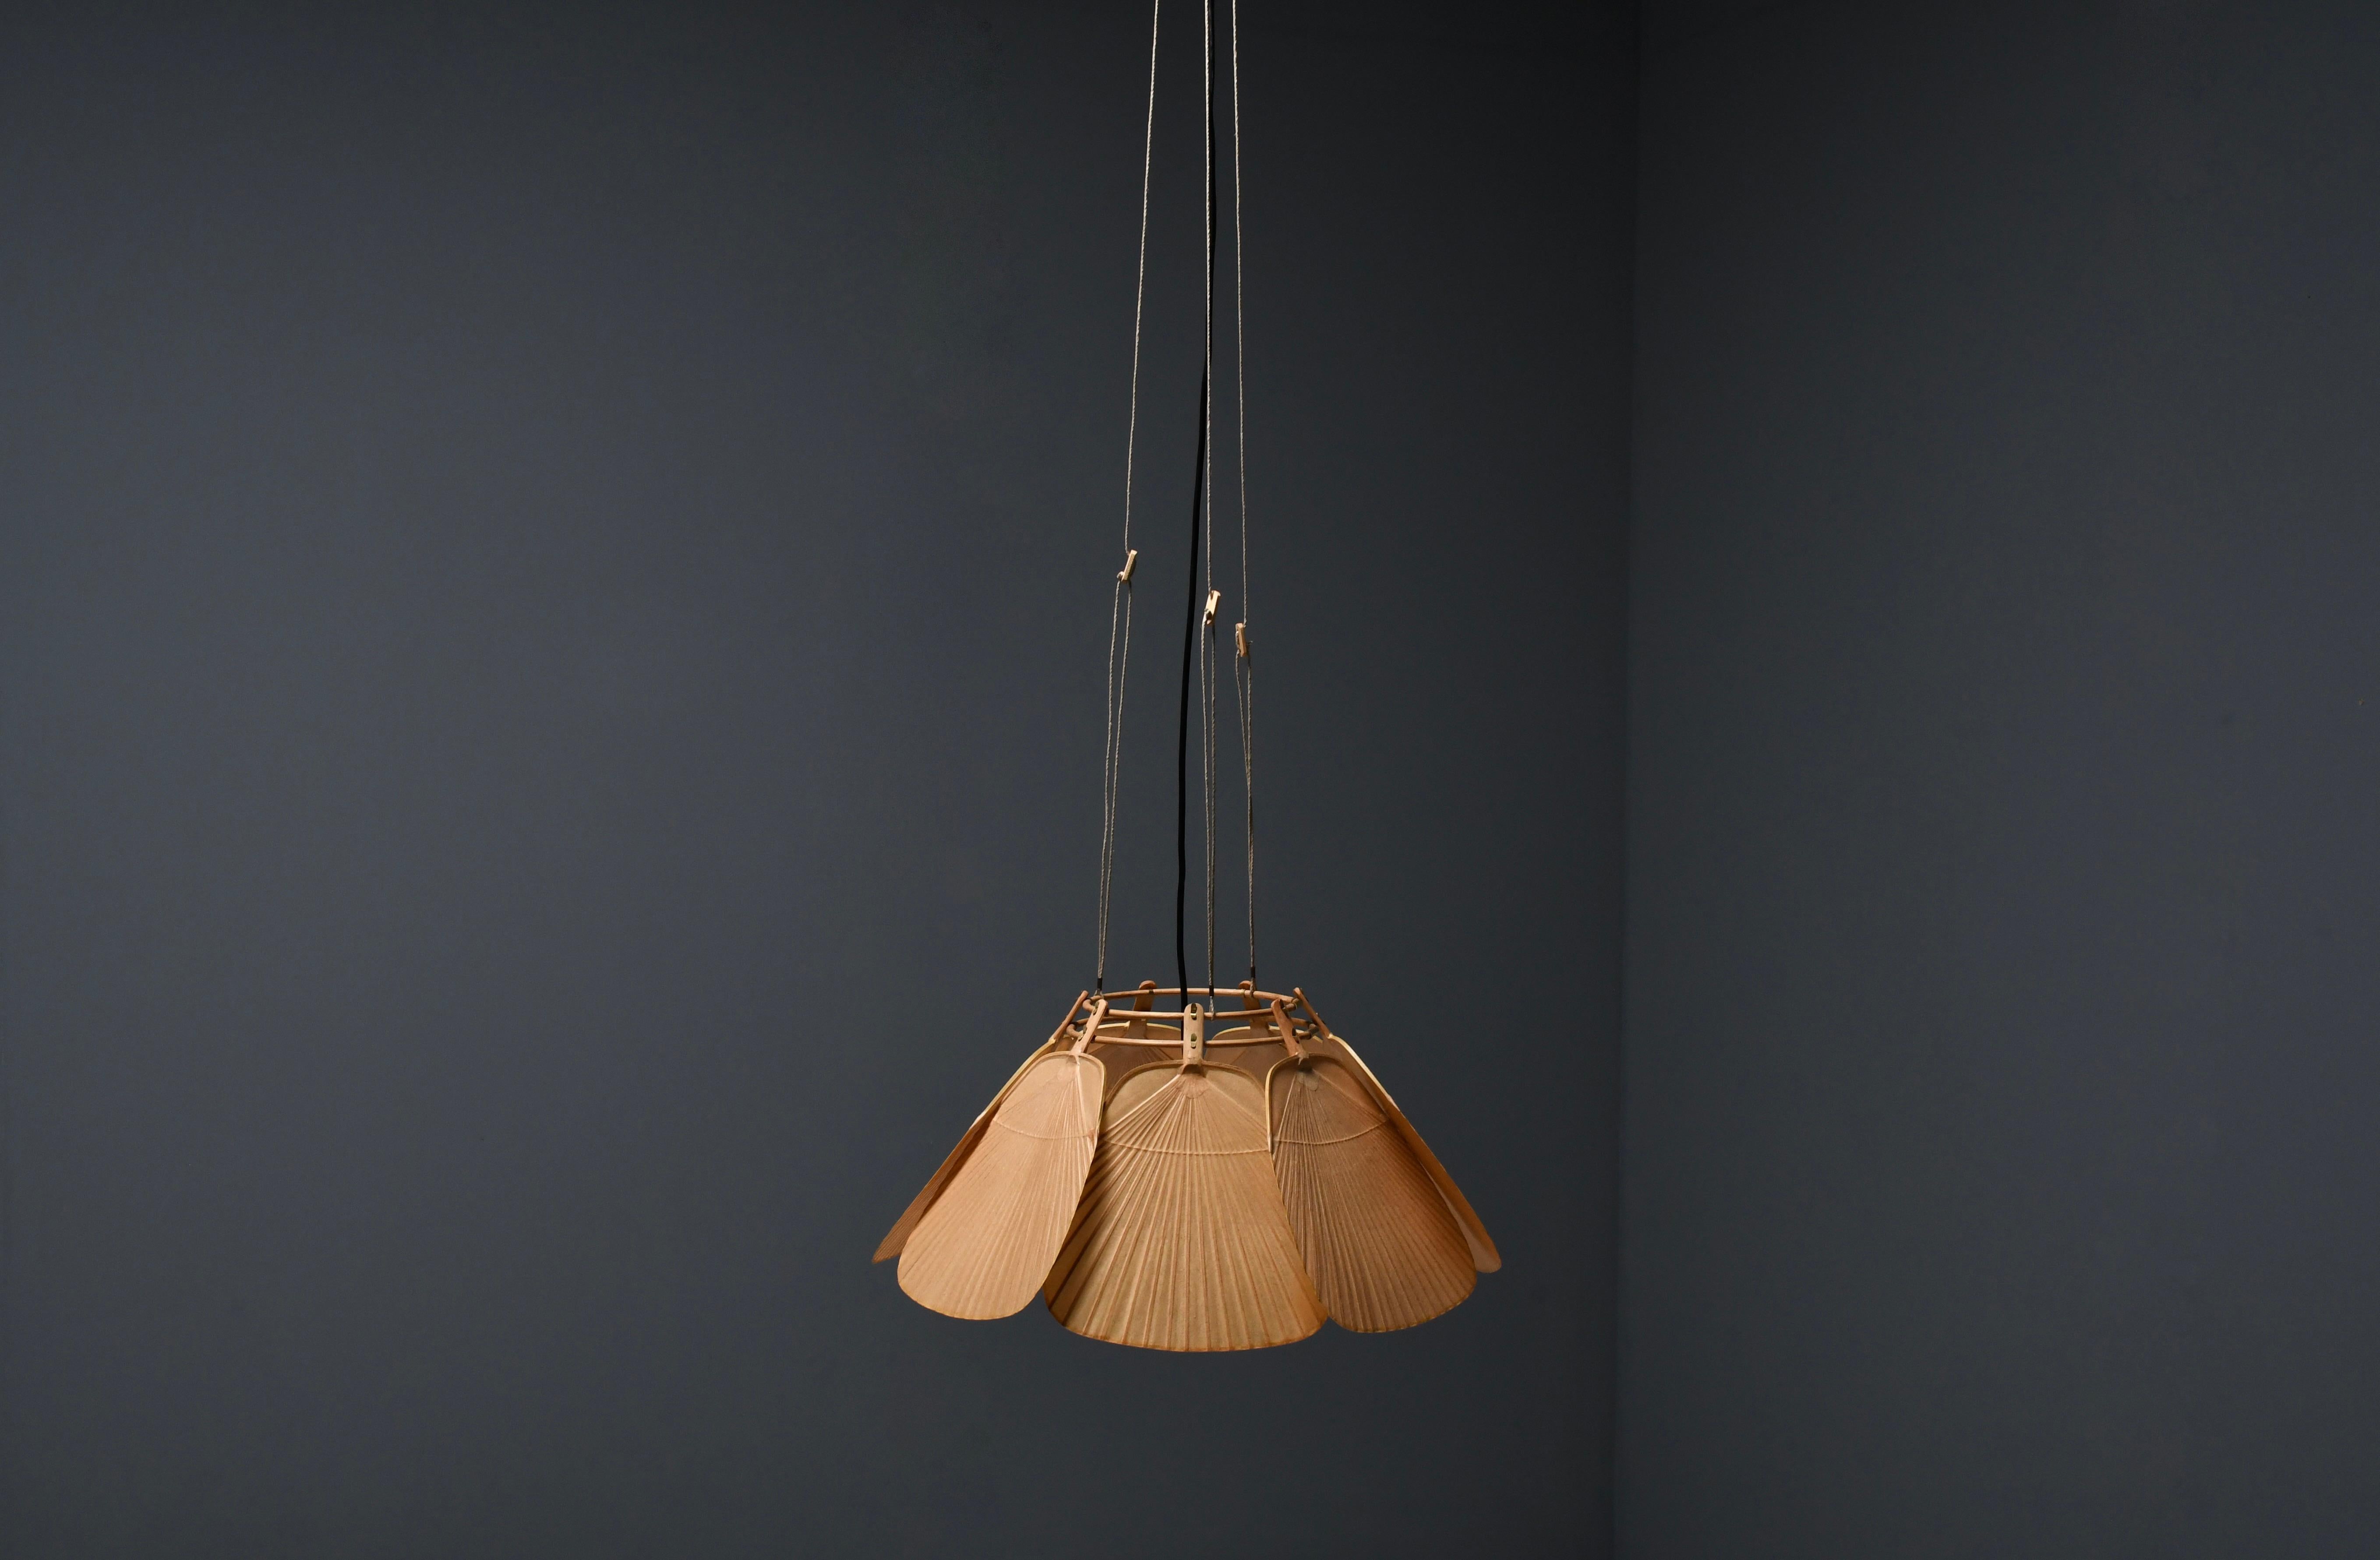 Rare Uchiwa Ju-Yon chandelier in very good condition. 

Designed by Ingo Maurer for M design, Germany. 

This chandelier is handmade from bamboo and Japanese rice paper. 

The lamp consists of seven fans hanging from a bamboo frame. 

When lit the